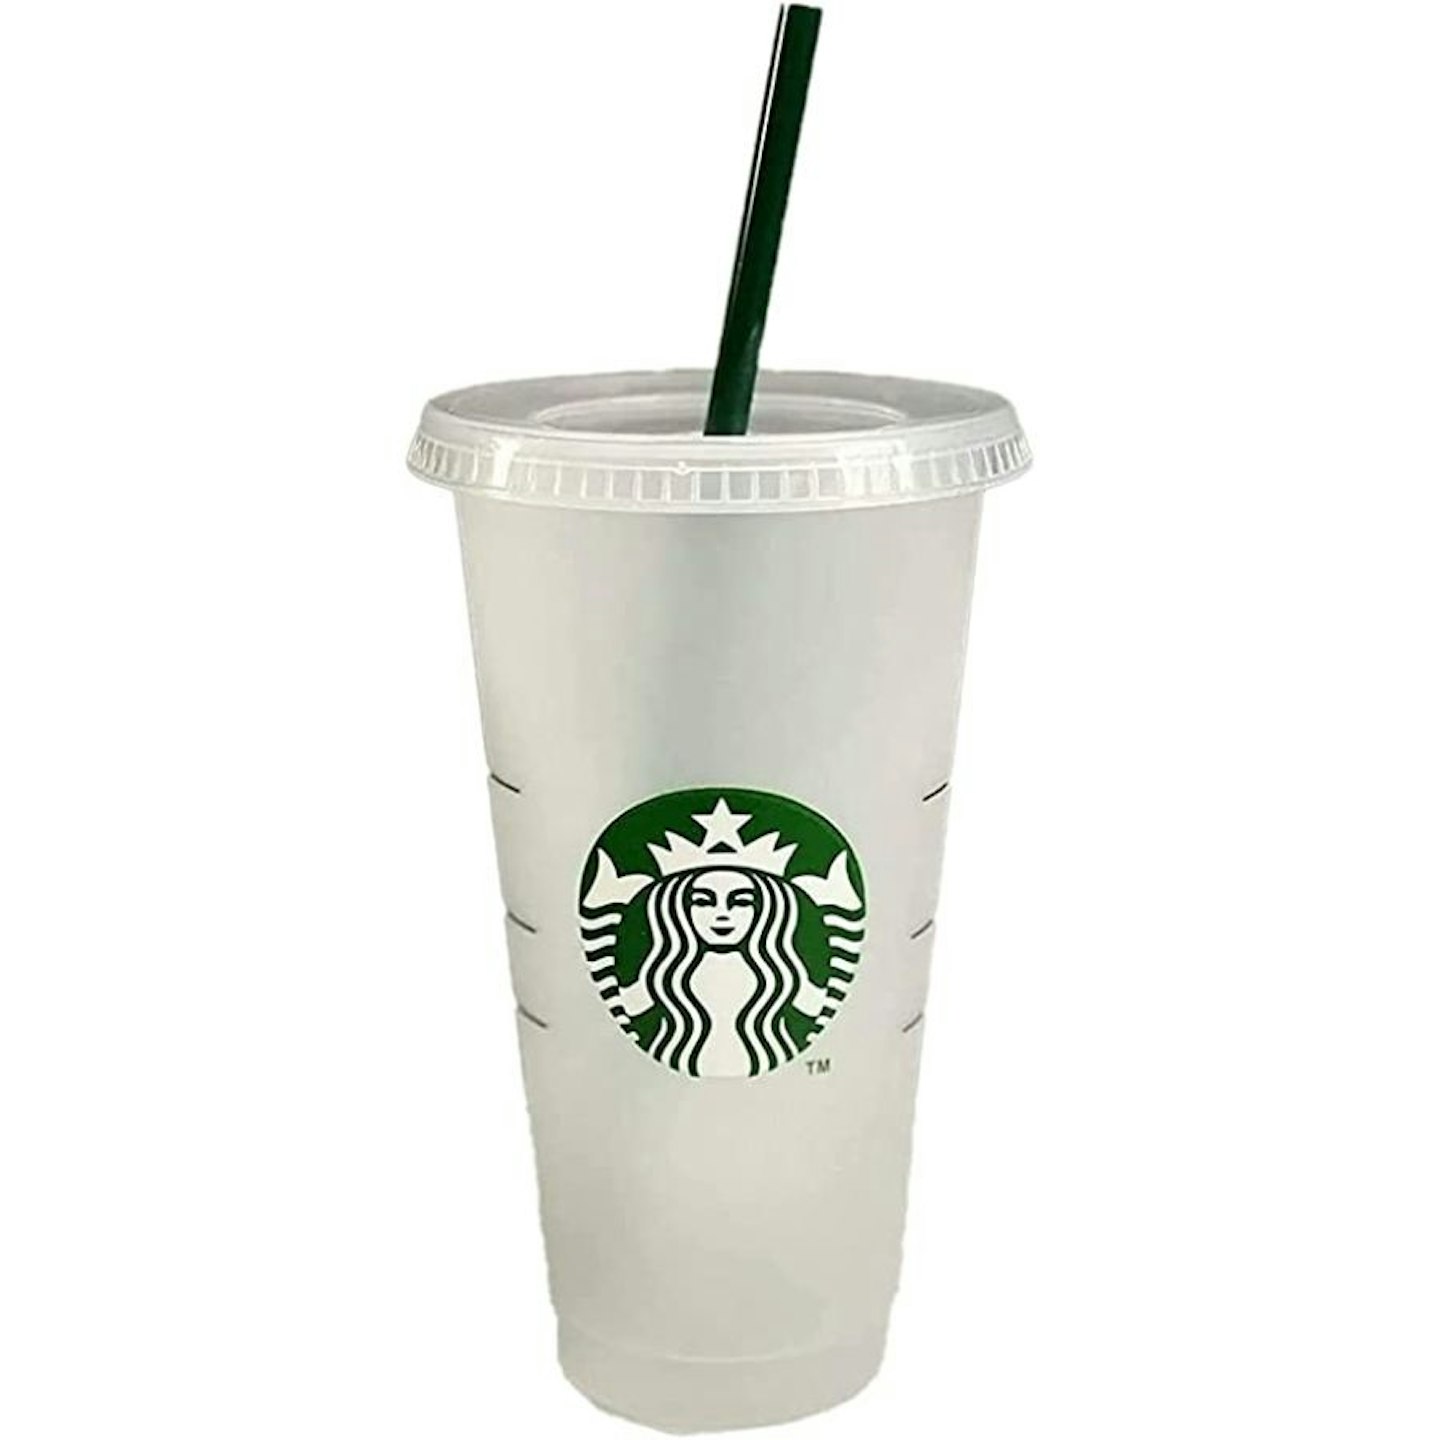 https://images.bauerhosting.com/celebrity/sites/4/2023/01/starbucks-reusable-cup-with-straw.jpg?auto=format&w=1440&q=80